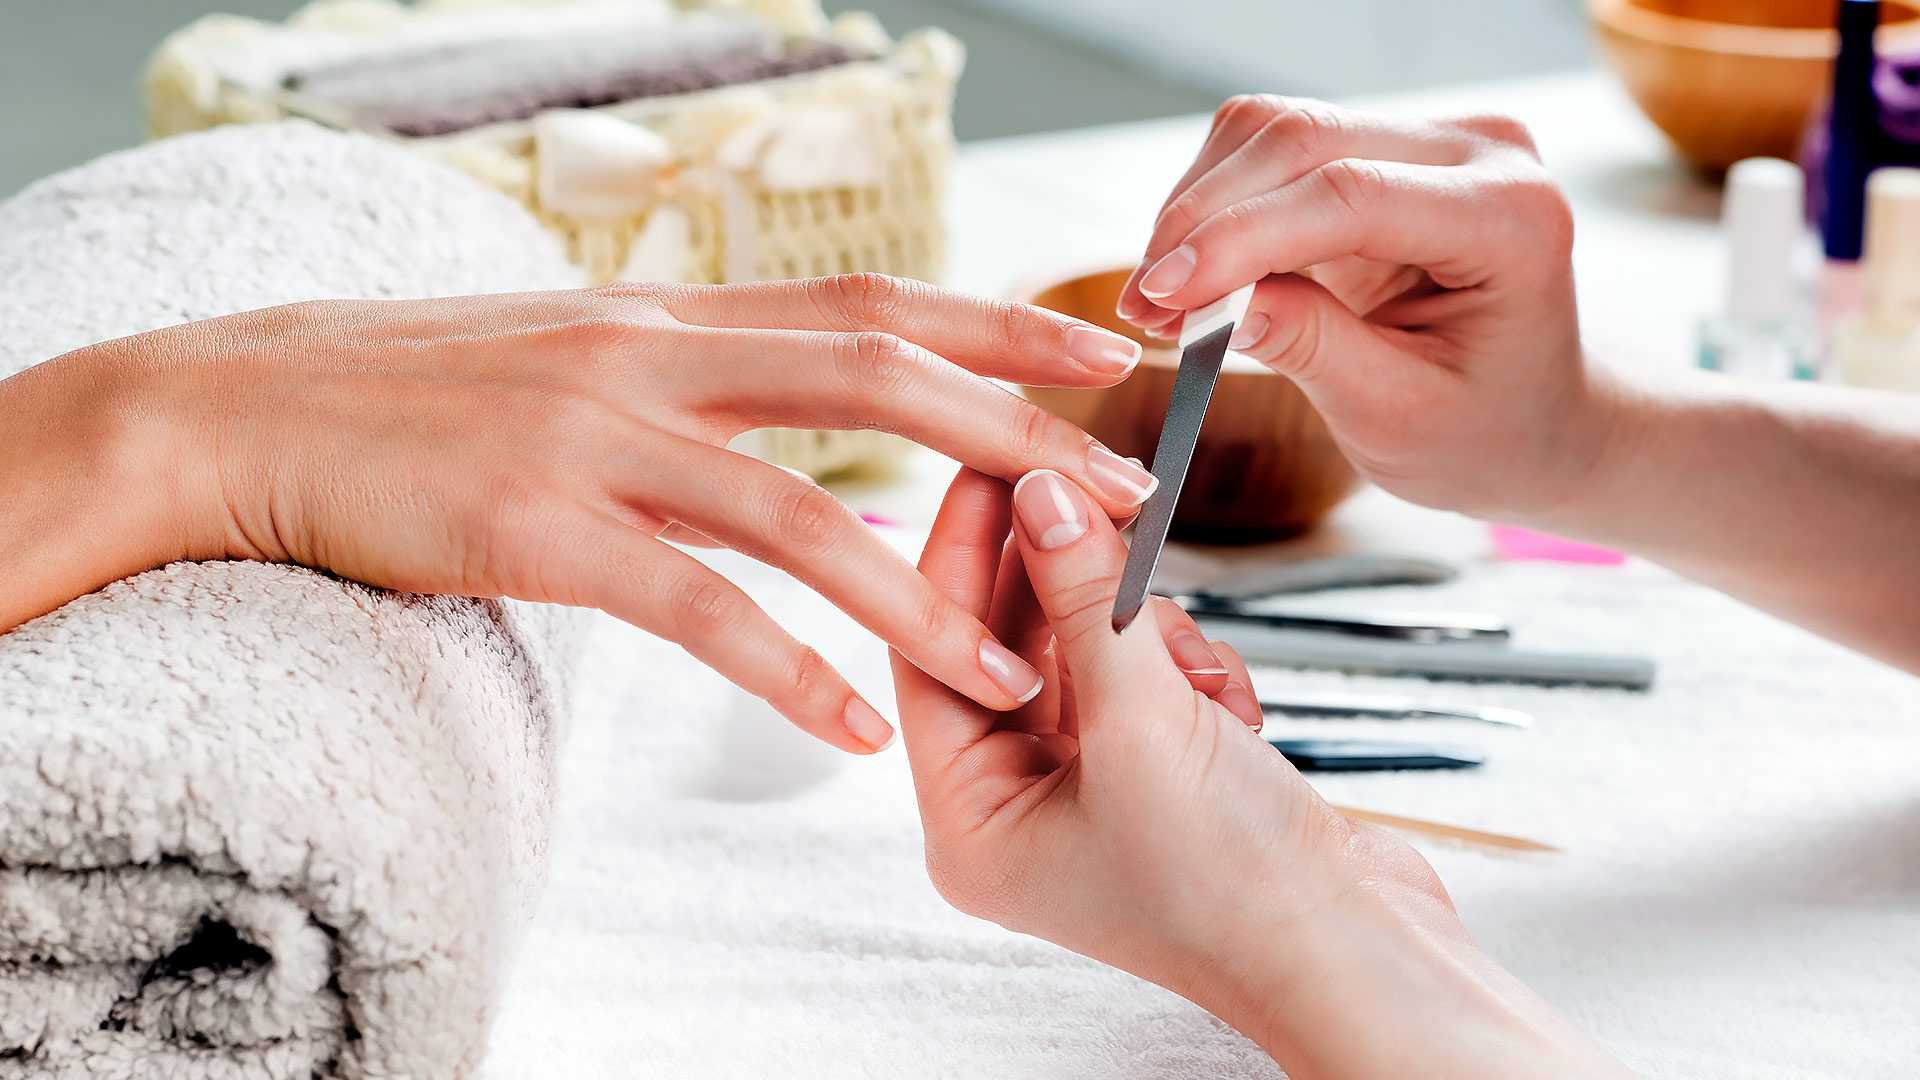 close-up of manicure treatment, filing nails